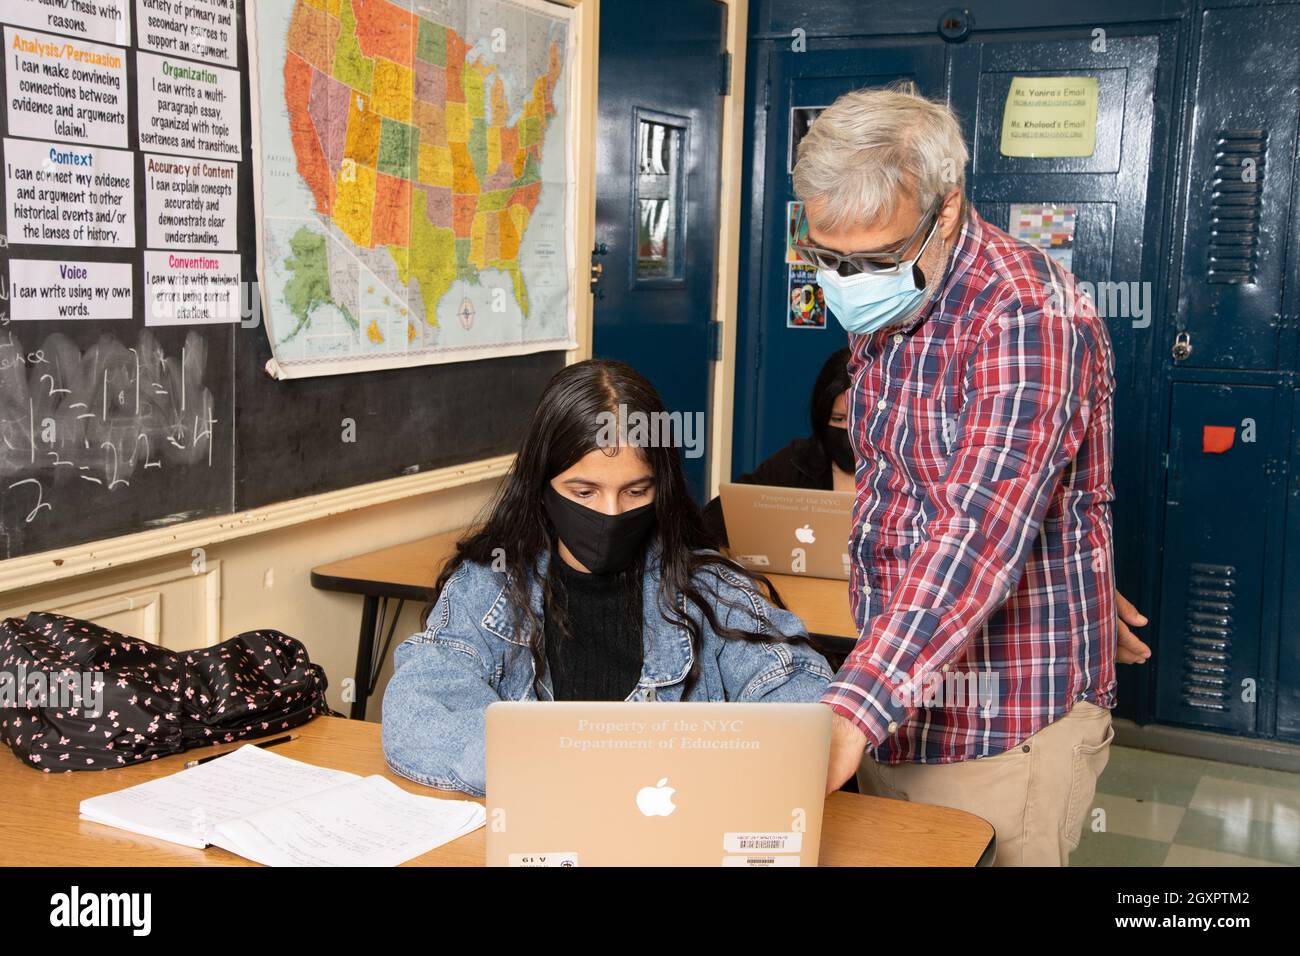 Education High School classroom scene male teacher working with female student in classroom, both wearing face masks to protect vs Covid-19 Stock Photo